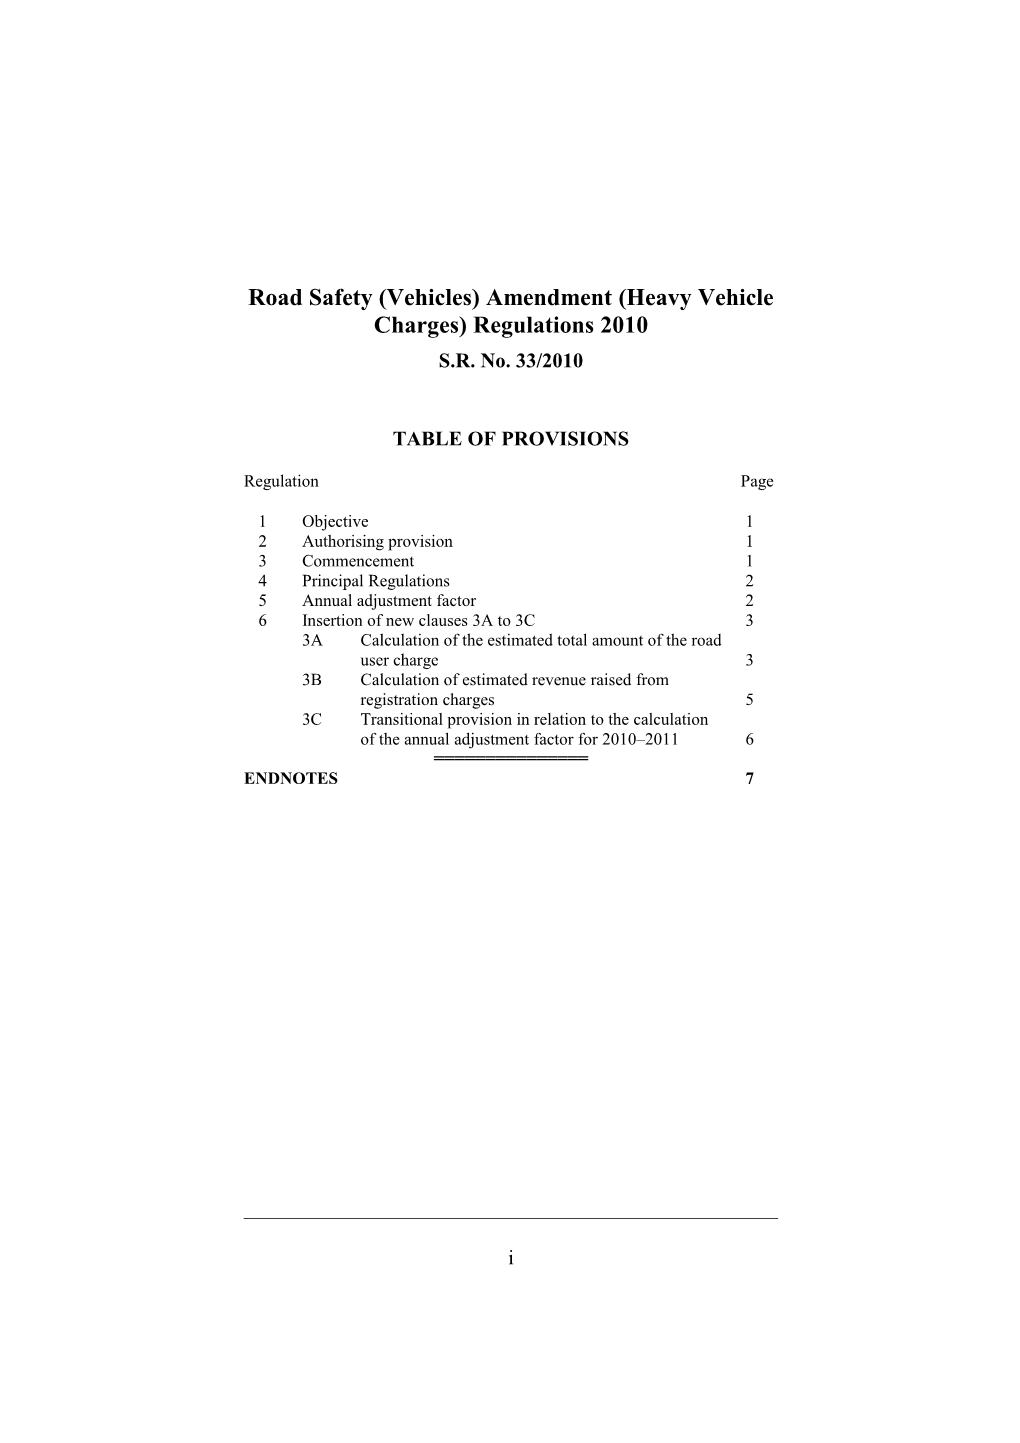 Road Safety (Vehicles) Amendment (Heavy Vehicle Charges) Regulations 2010